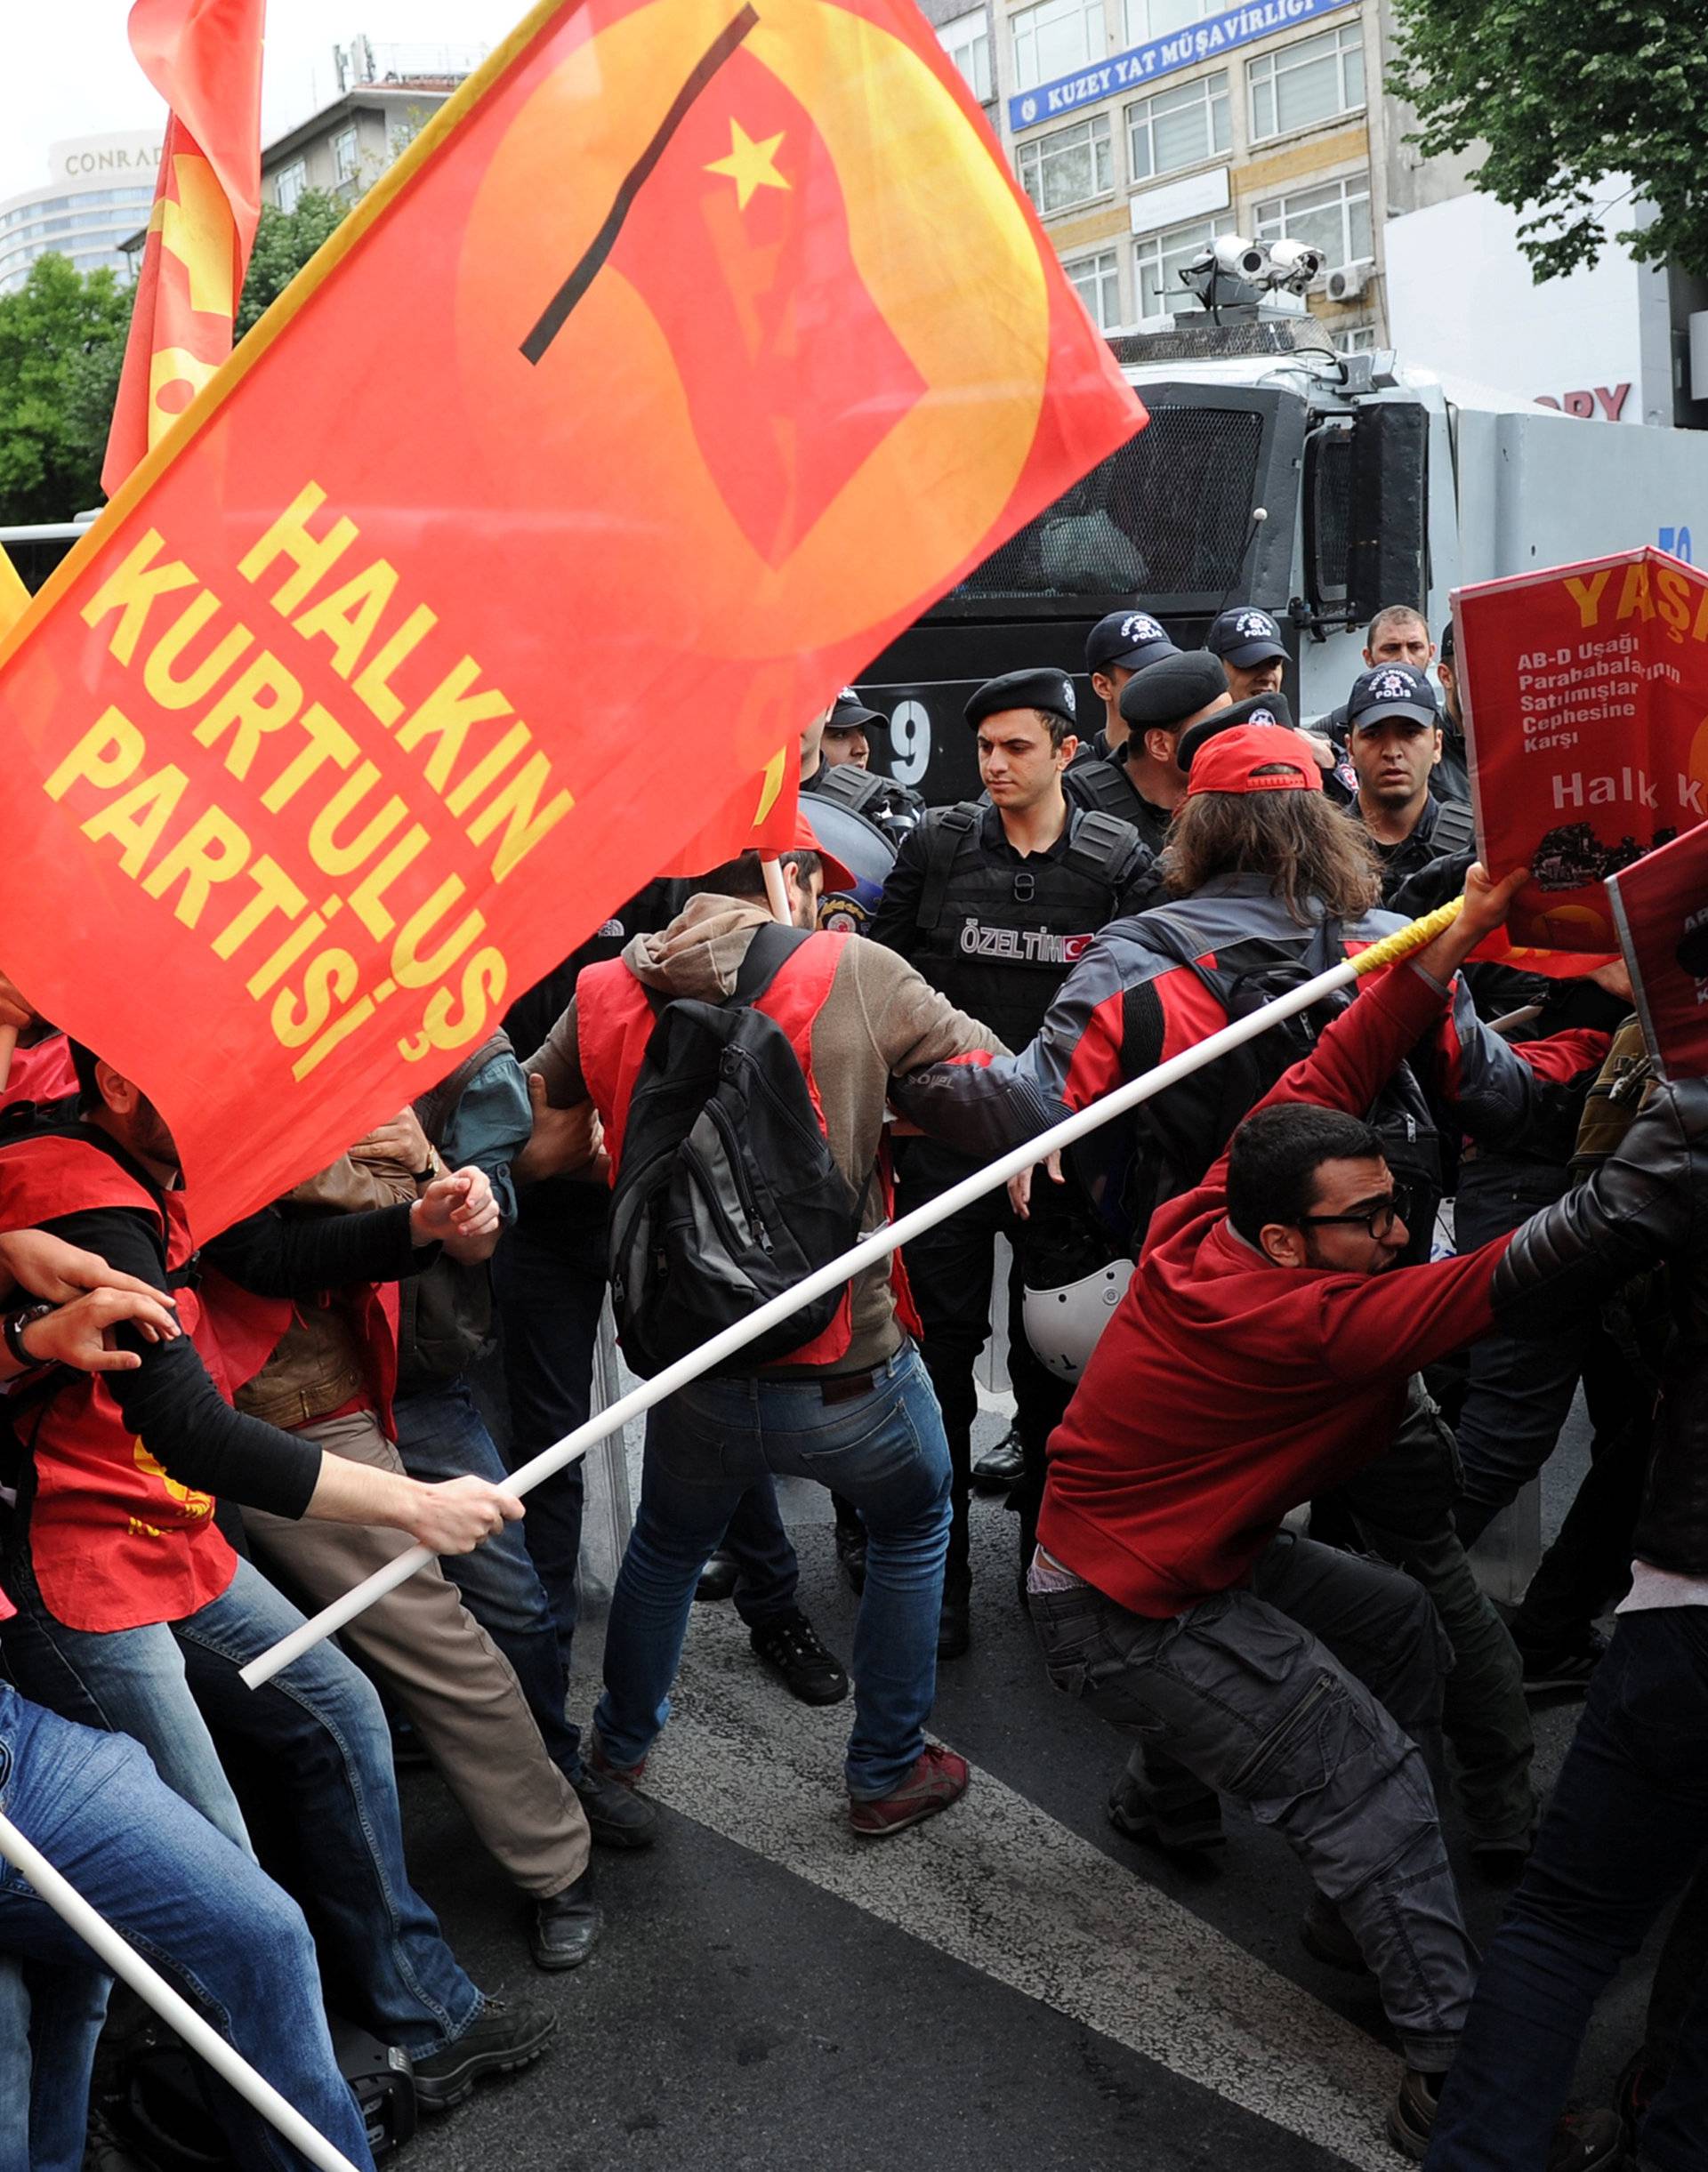 Turkish riot police scuffle with a group of protesters as they attempted to defy a ban and march on Taksim Square